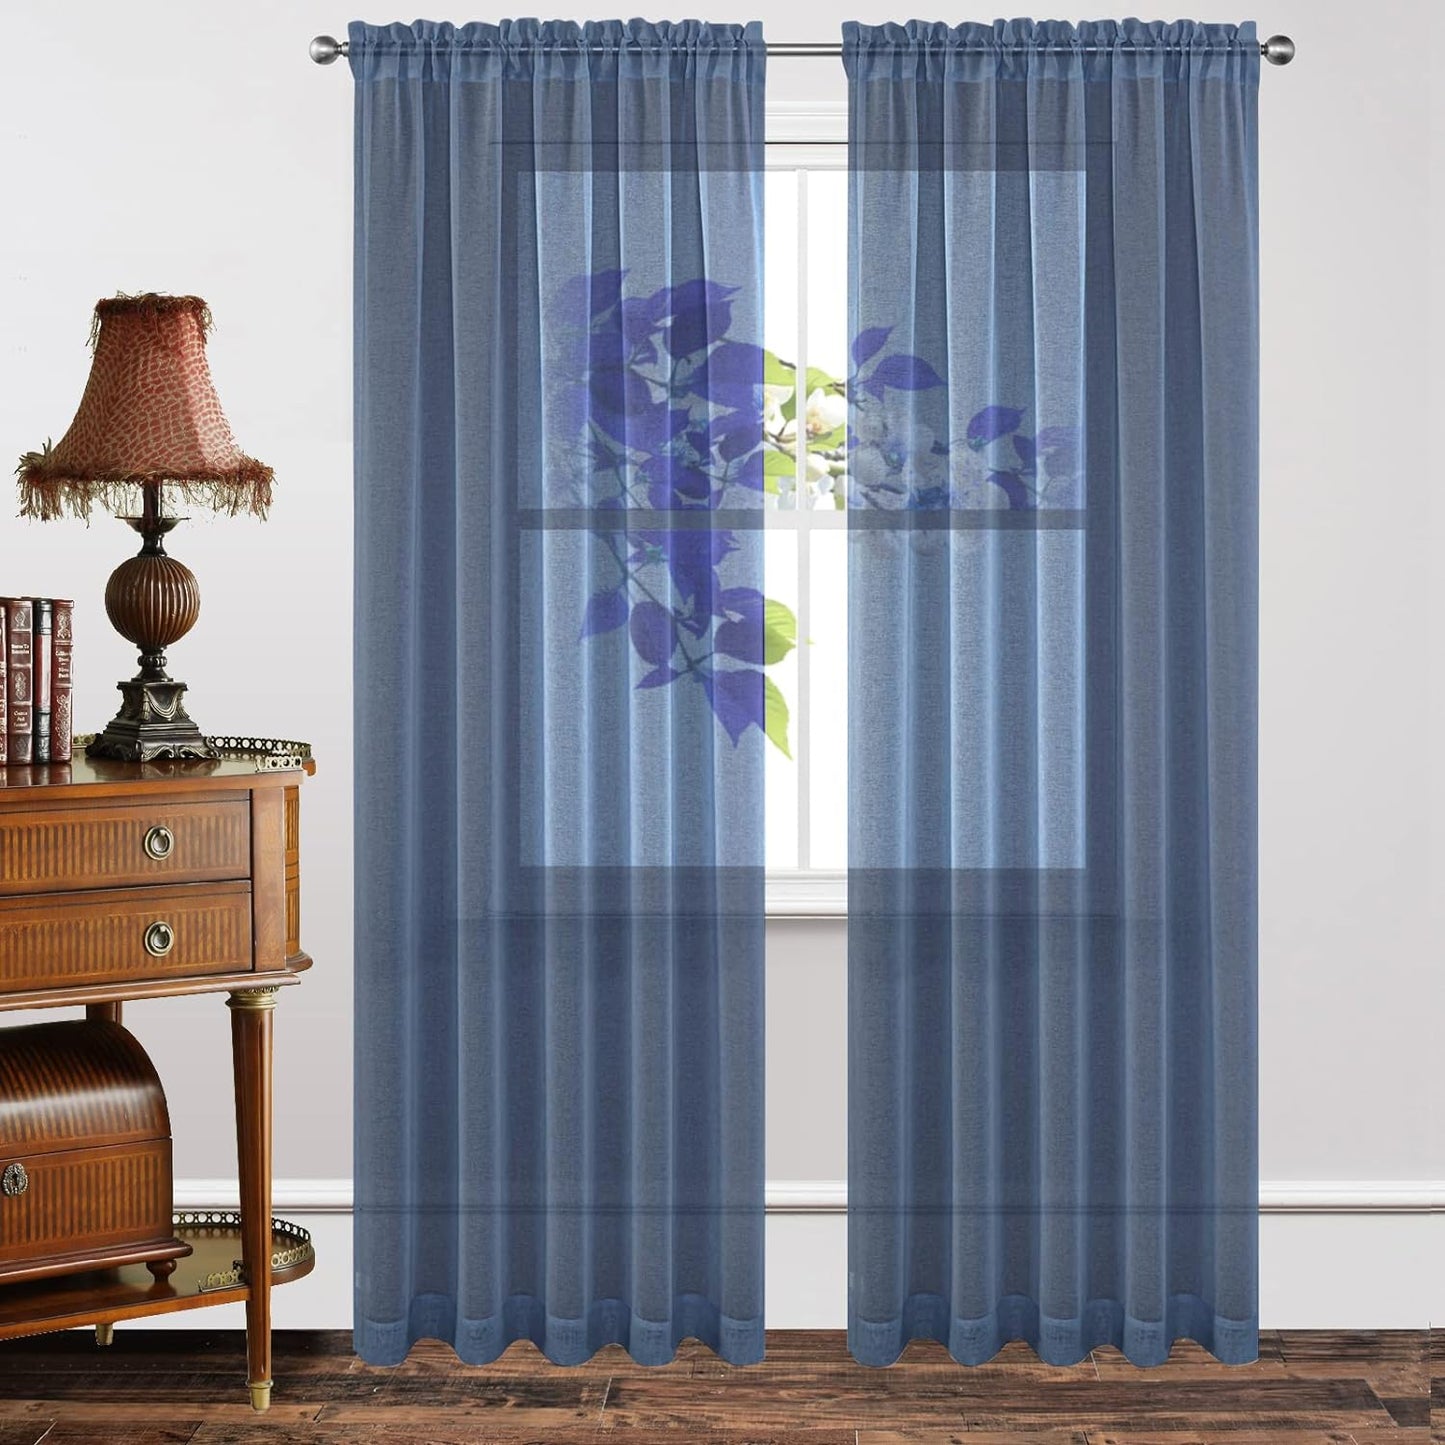 Joydeco White Sheer Curtains 63 Inch Length 2 Panels Set, Rod Pocket Long Sheer Curtains for Window Bedroom Living Room, Lightweight Semi Drape Panels for Yard Patio (54X63 Inch, off White)  Joydeco Navy Blue 54W X 84L Inch X 2 Panels 